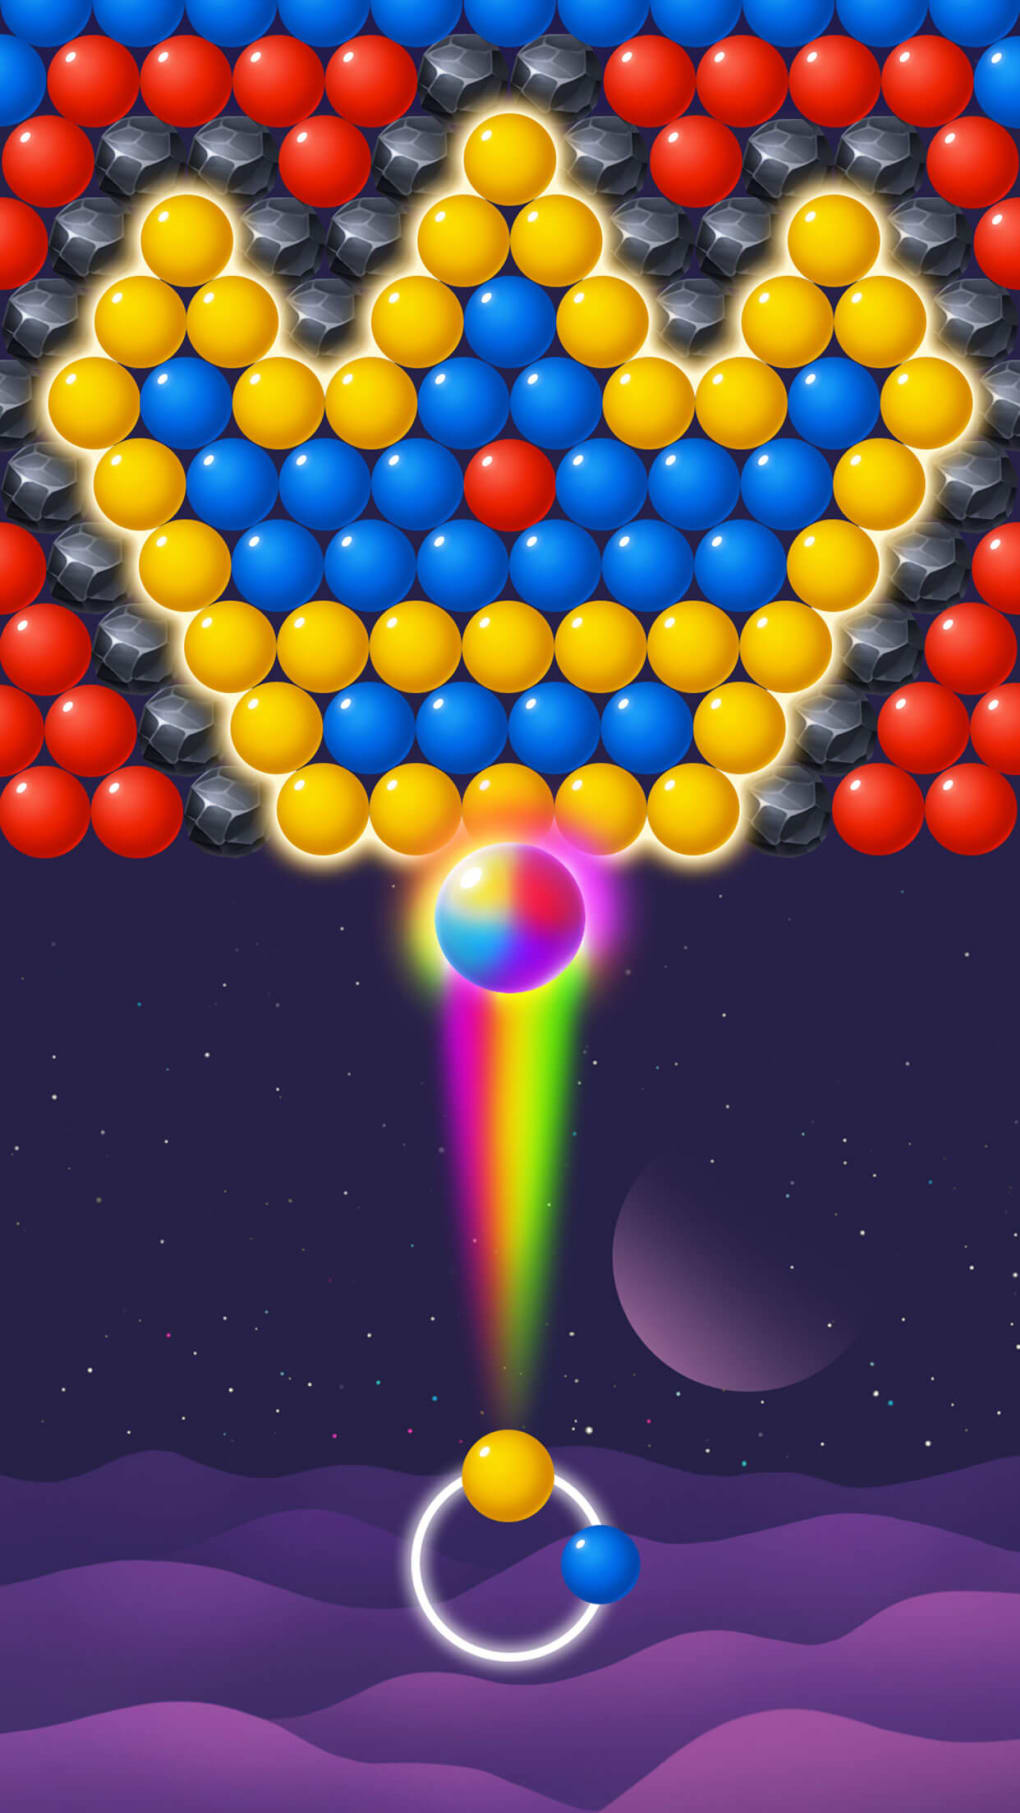 Download Bubble Shooter Game Free for Windows PC (Shoot Balloons)